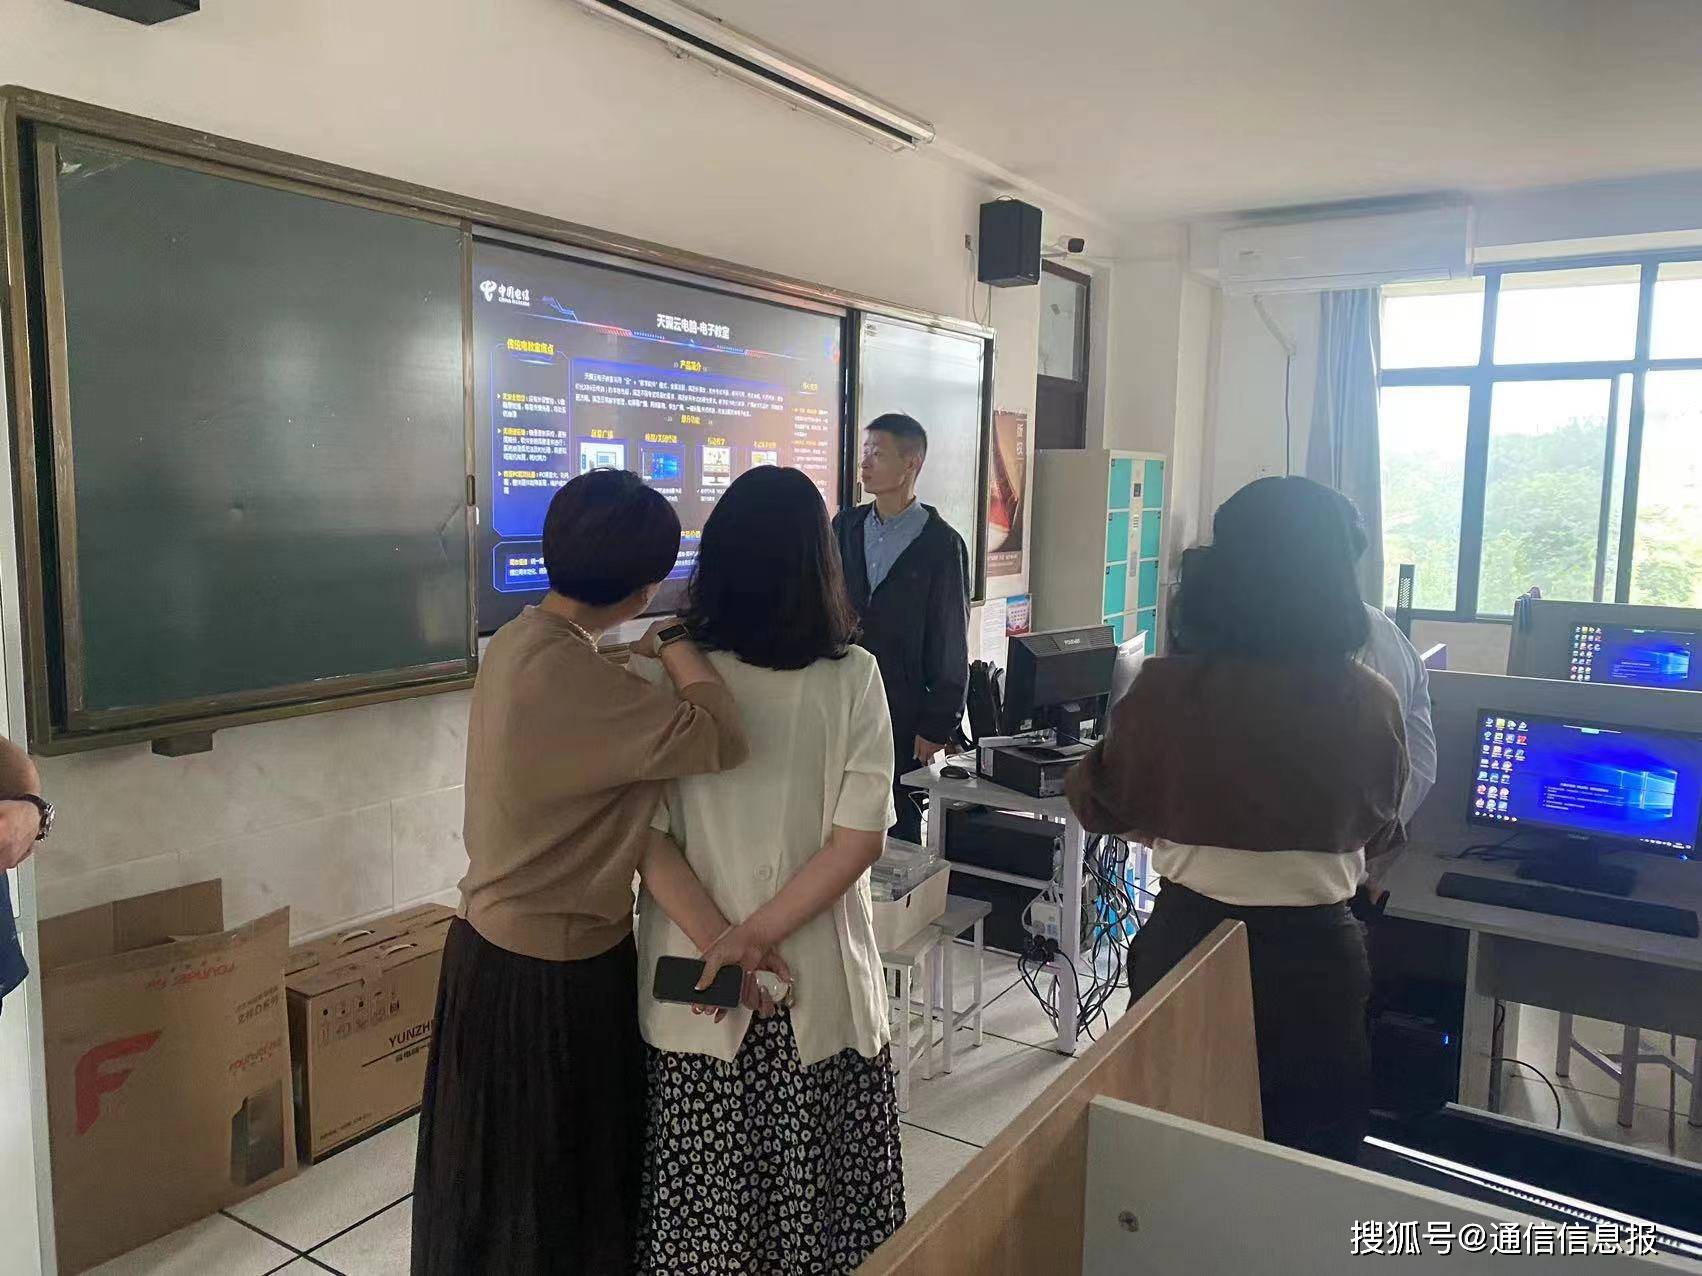 5G, AI, Tianyi Cloud blessing! The future of Hubei campus has arrived